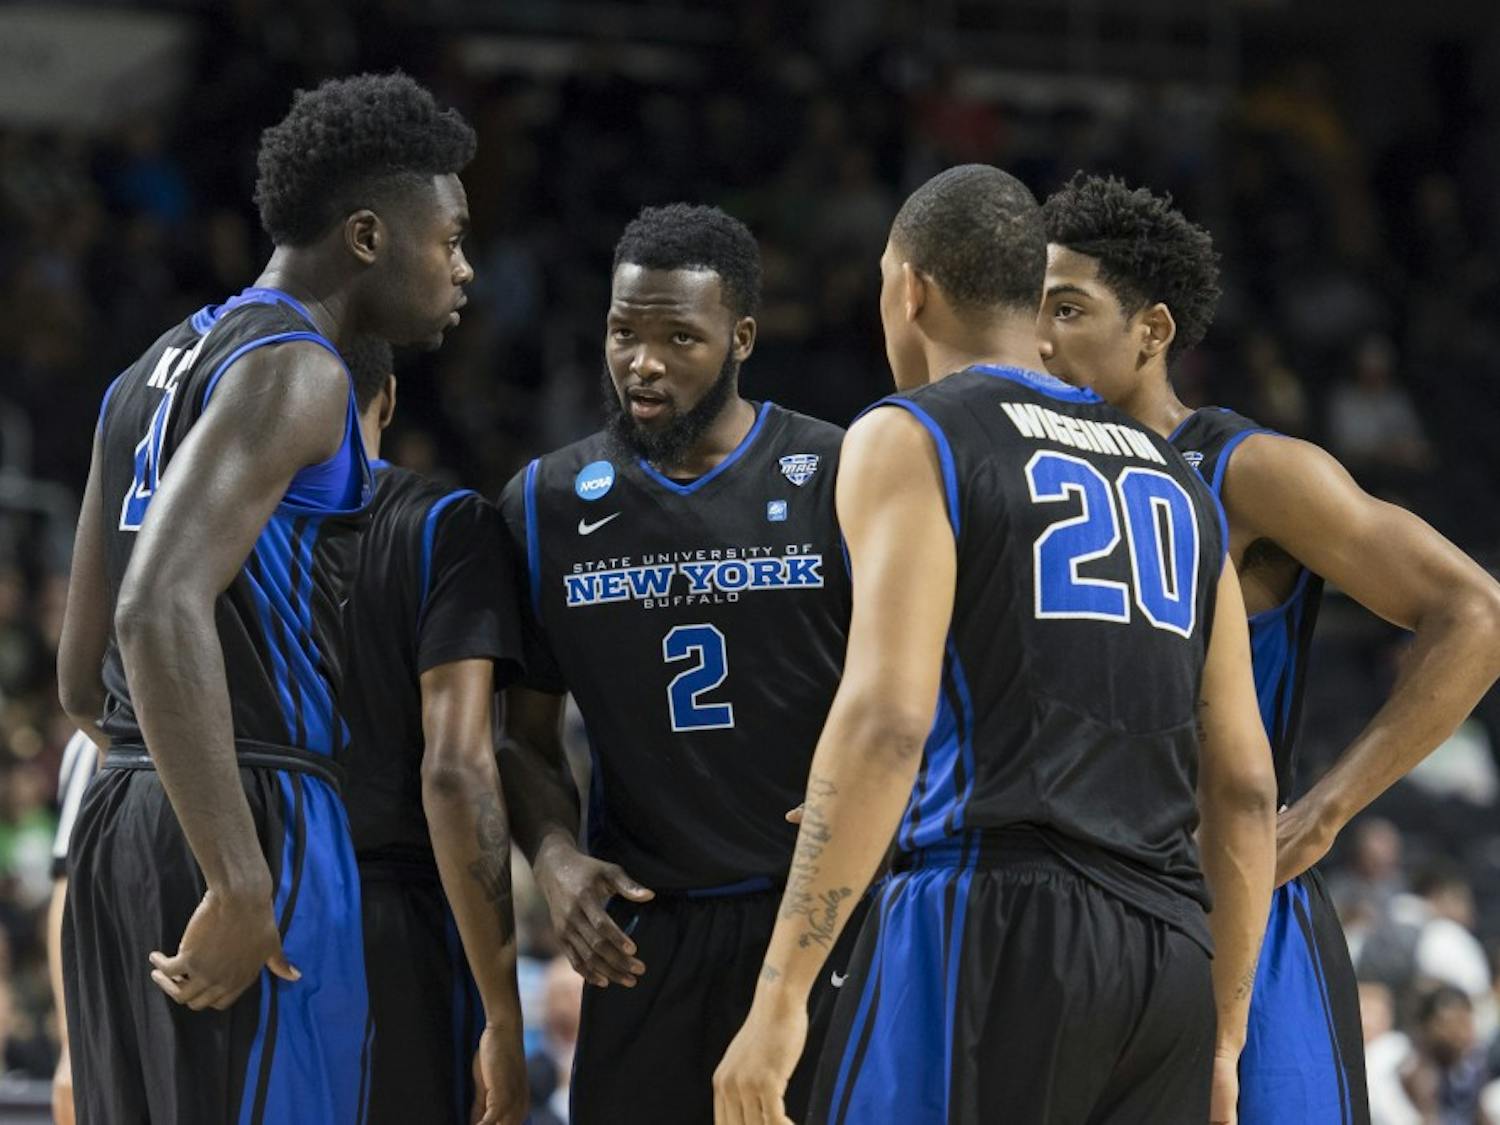 Junior wing Willie Conner (2) leads a Bulls team huddle during their NCAA Tournament matchup against No. 3 seed Miami.&nbsp;